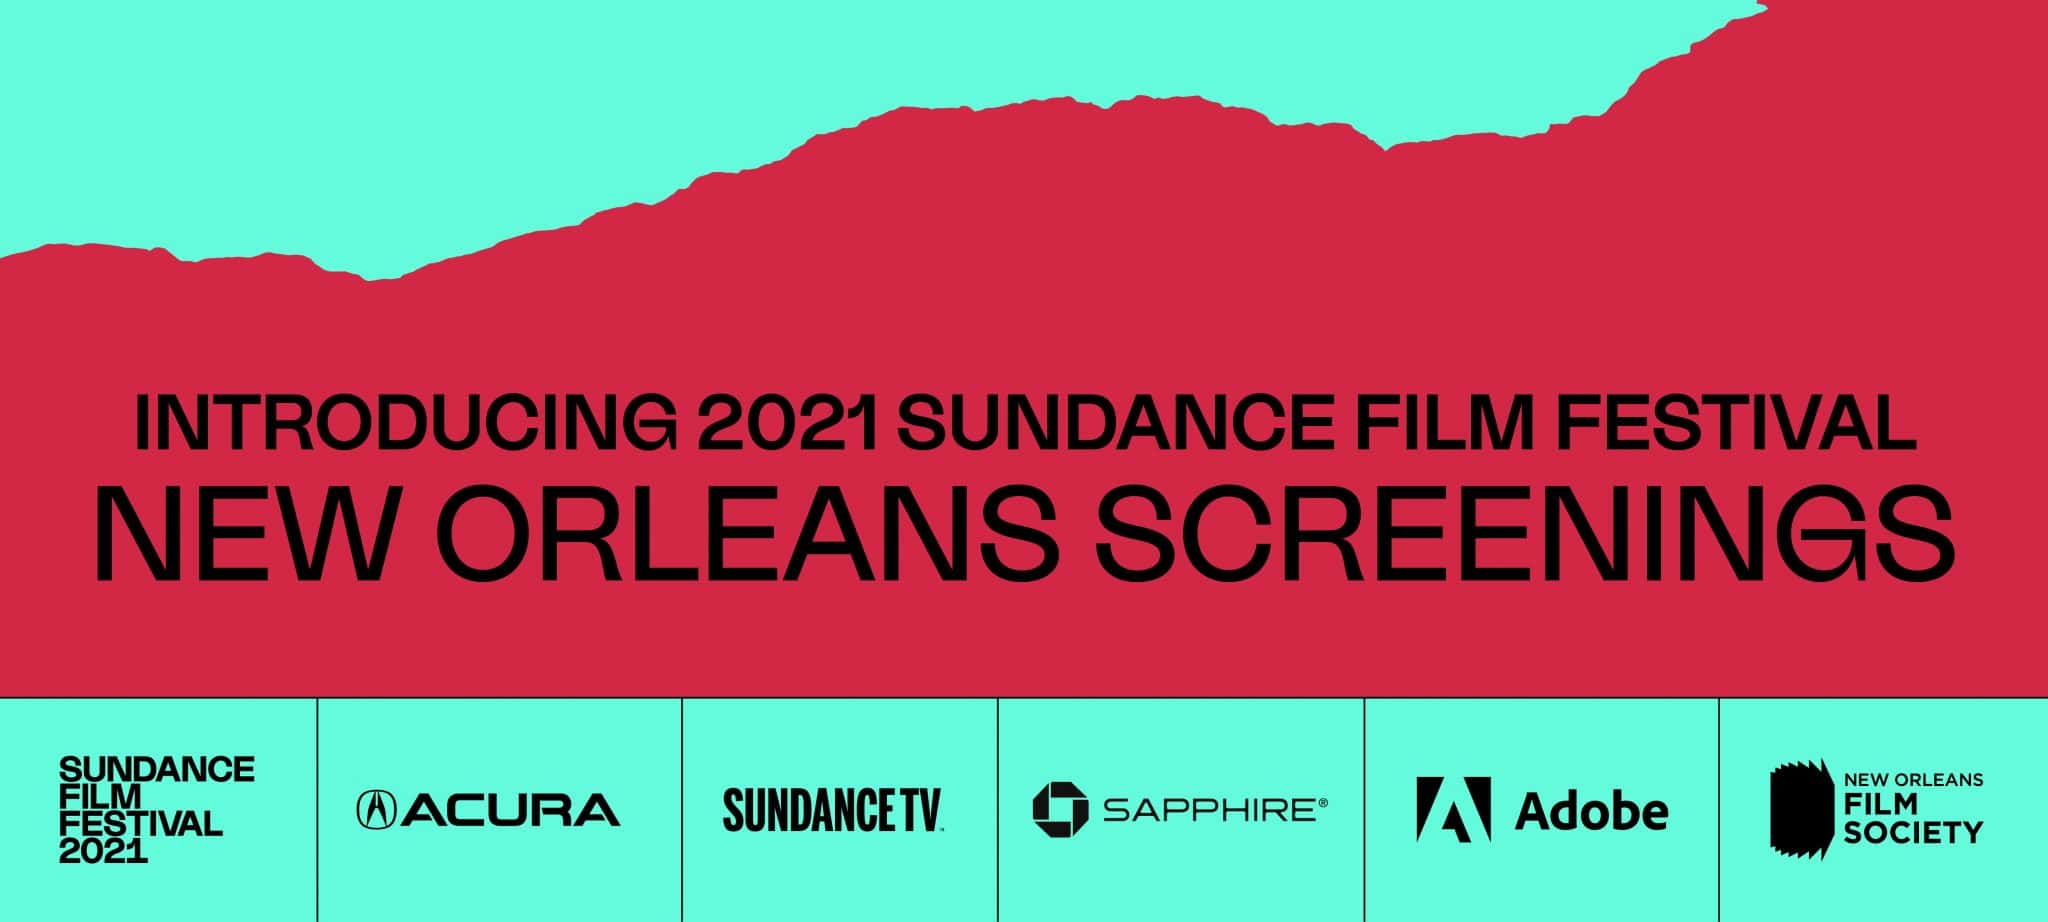 Sundance is coming to New Orleans New Orleans Film Society